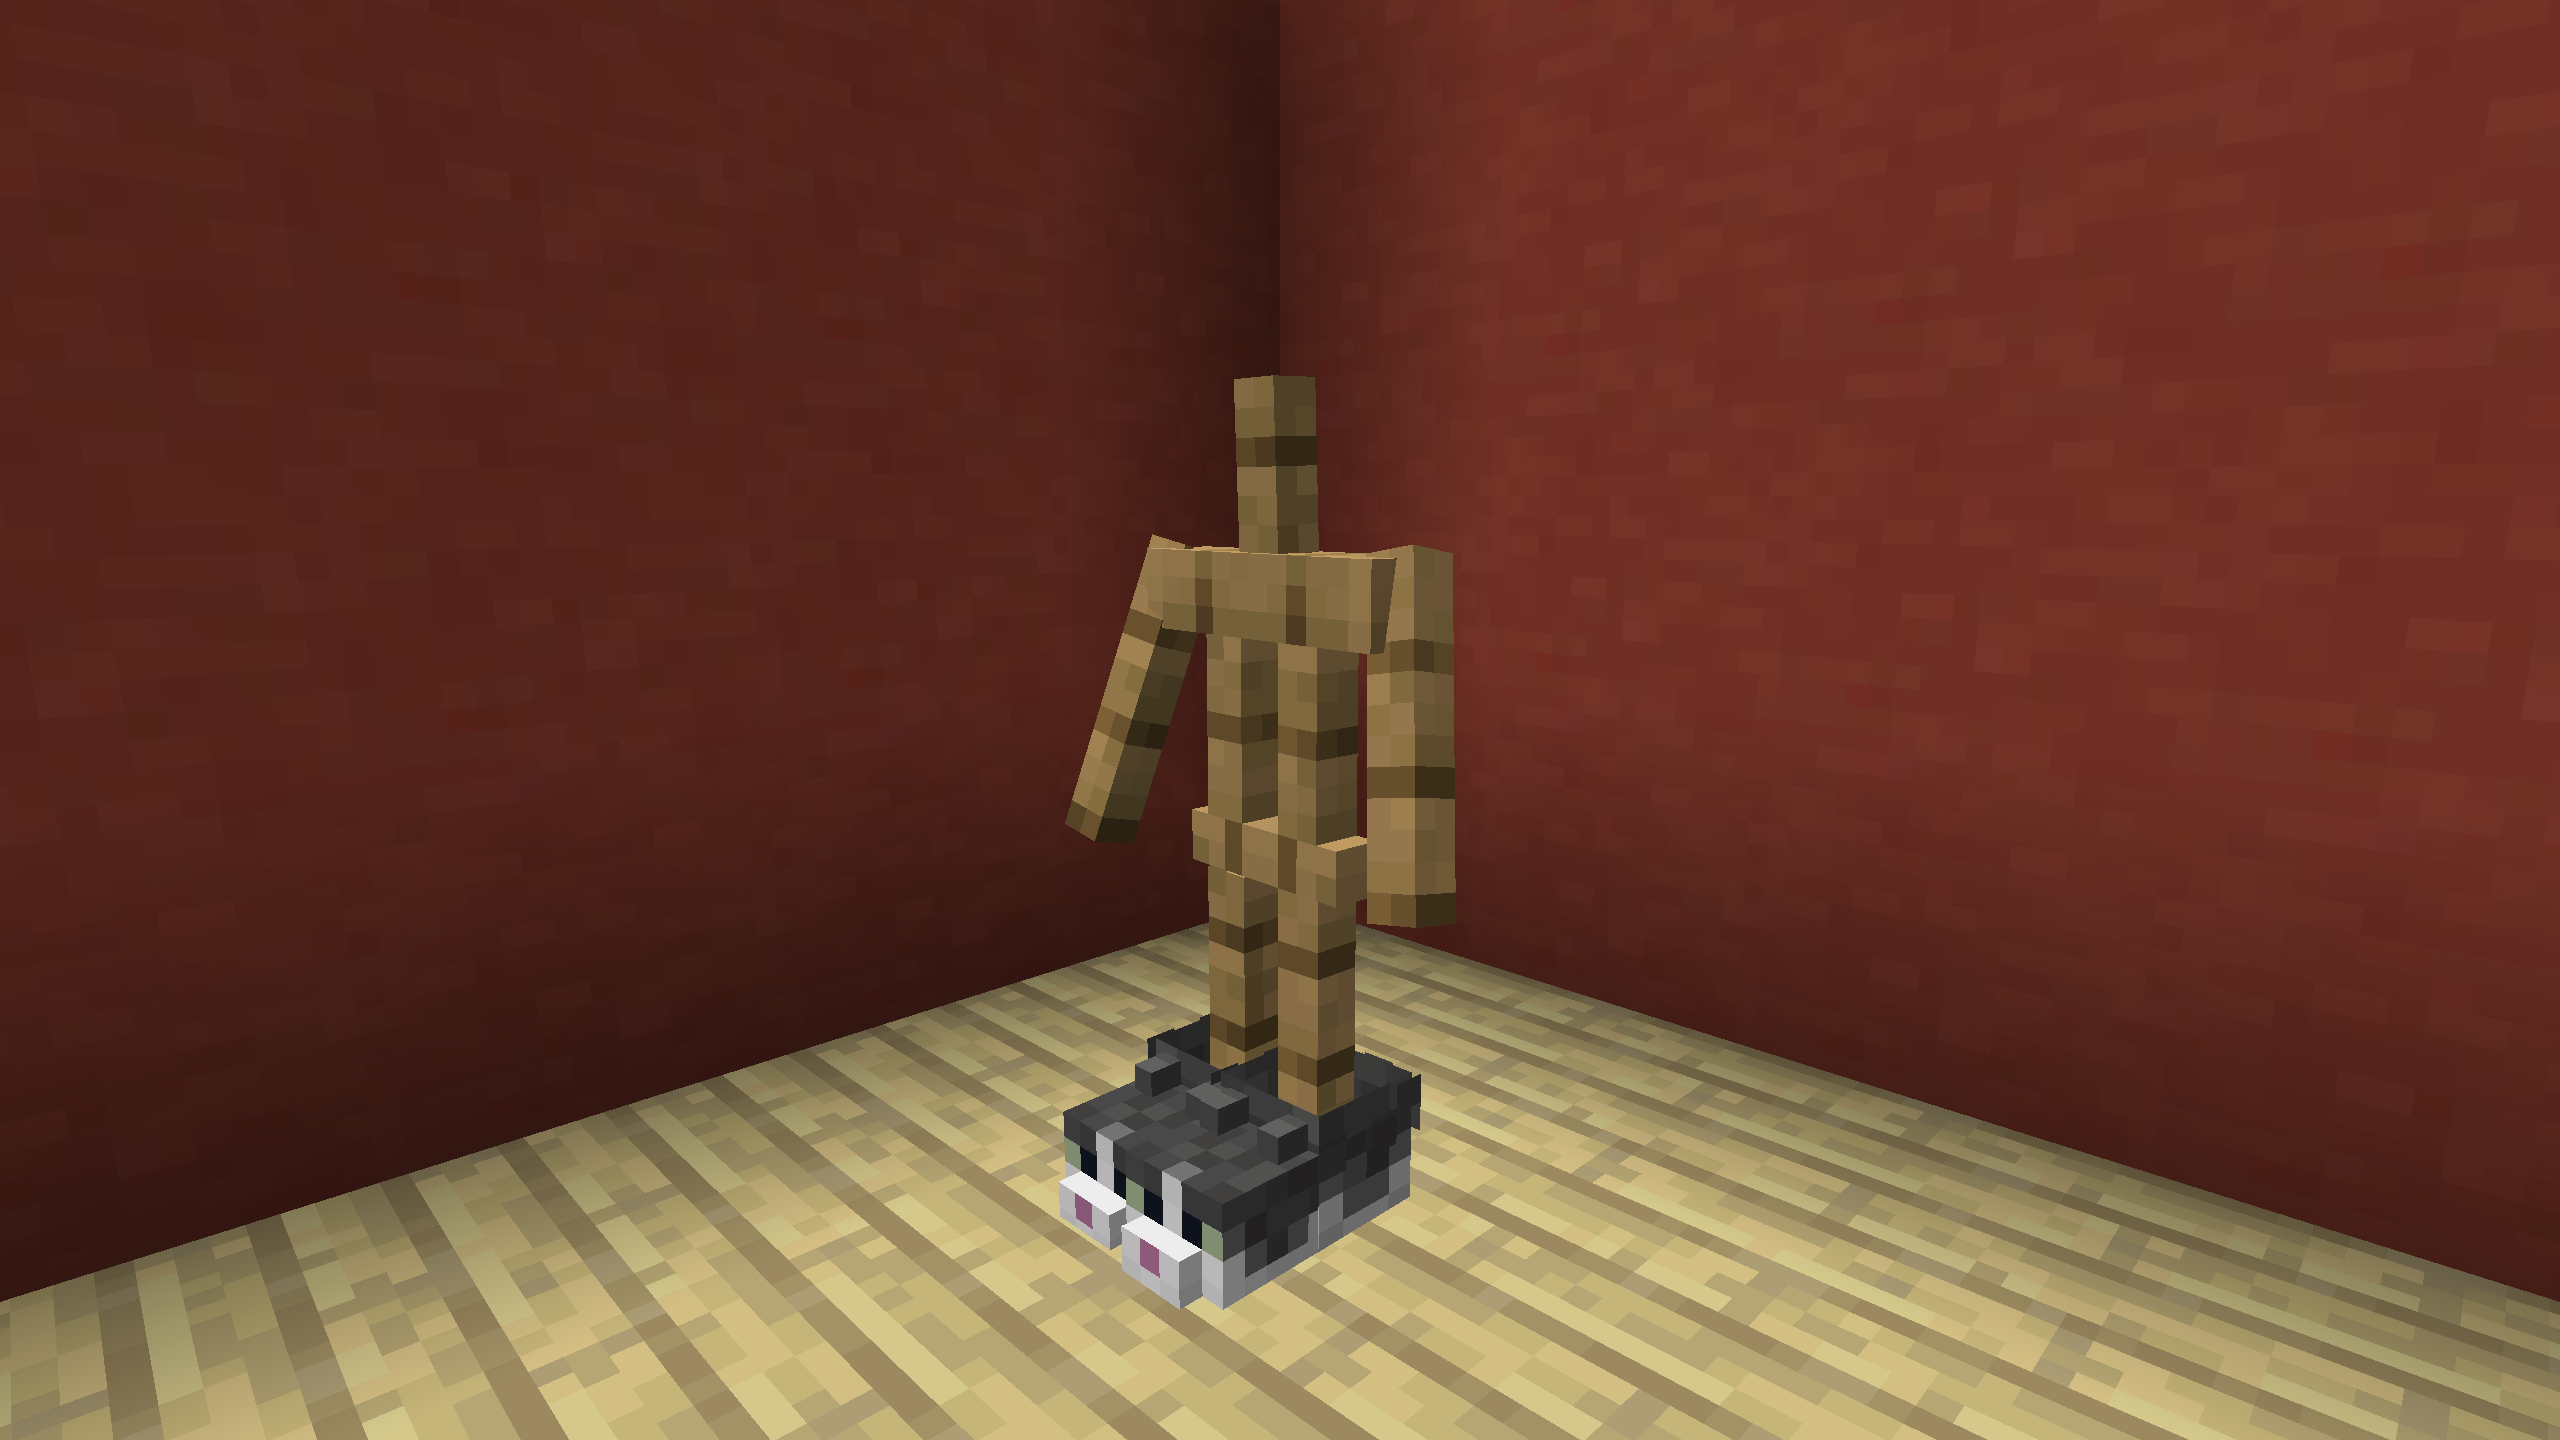 Kitty Slippers from Artifacts mod doesn't work vs Creeper Overhaul